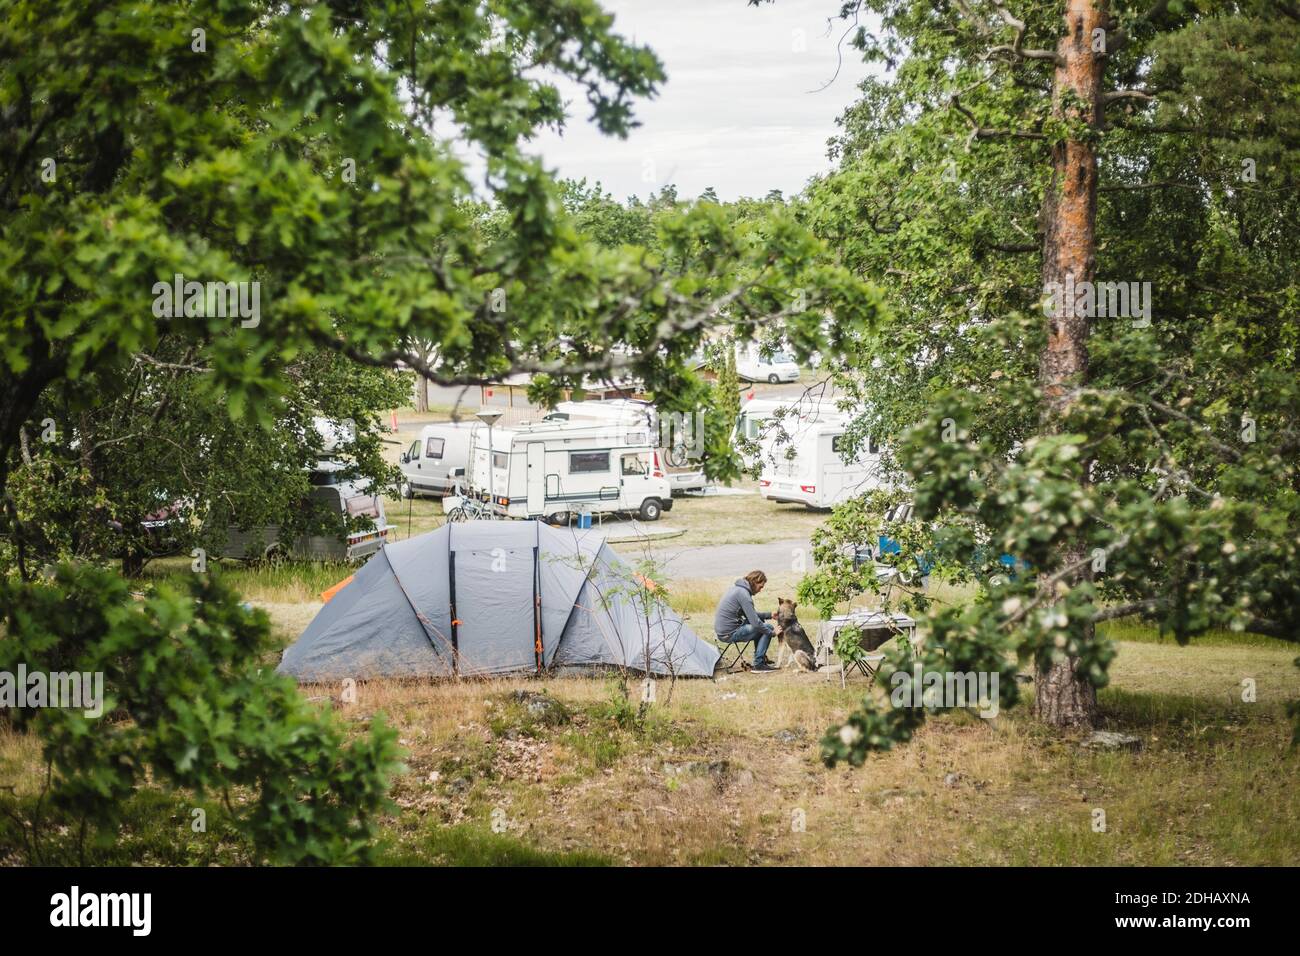 Man playing with dog by tent at camping site Stock Photo